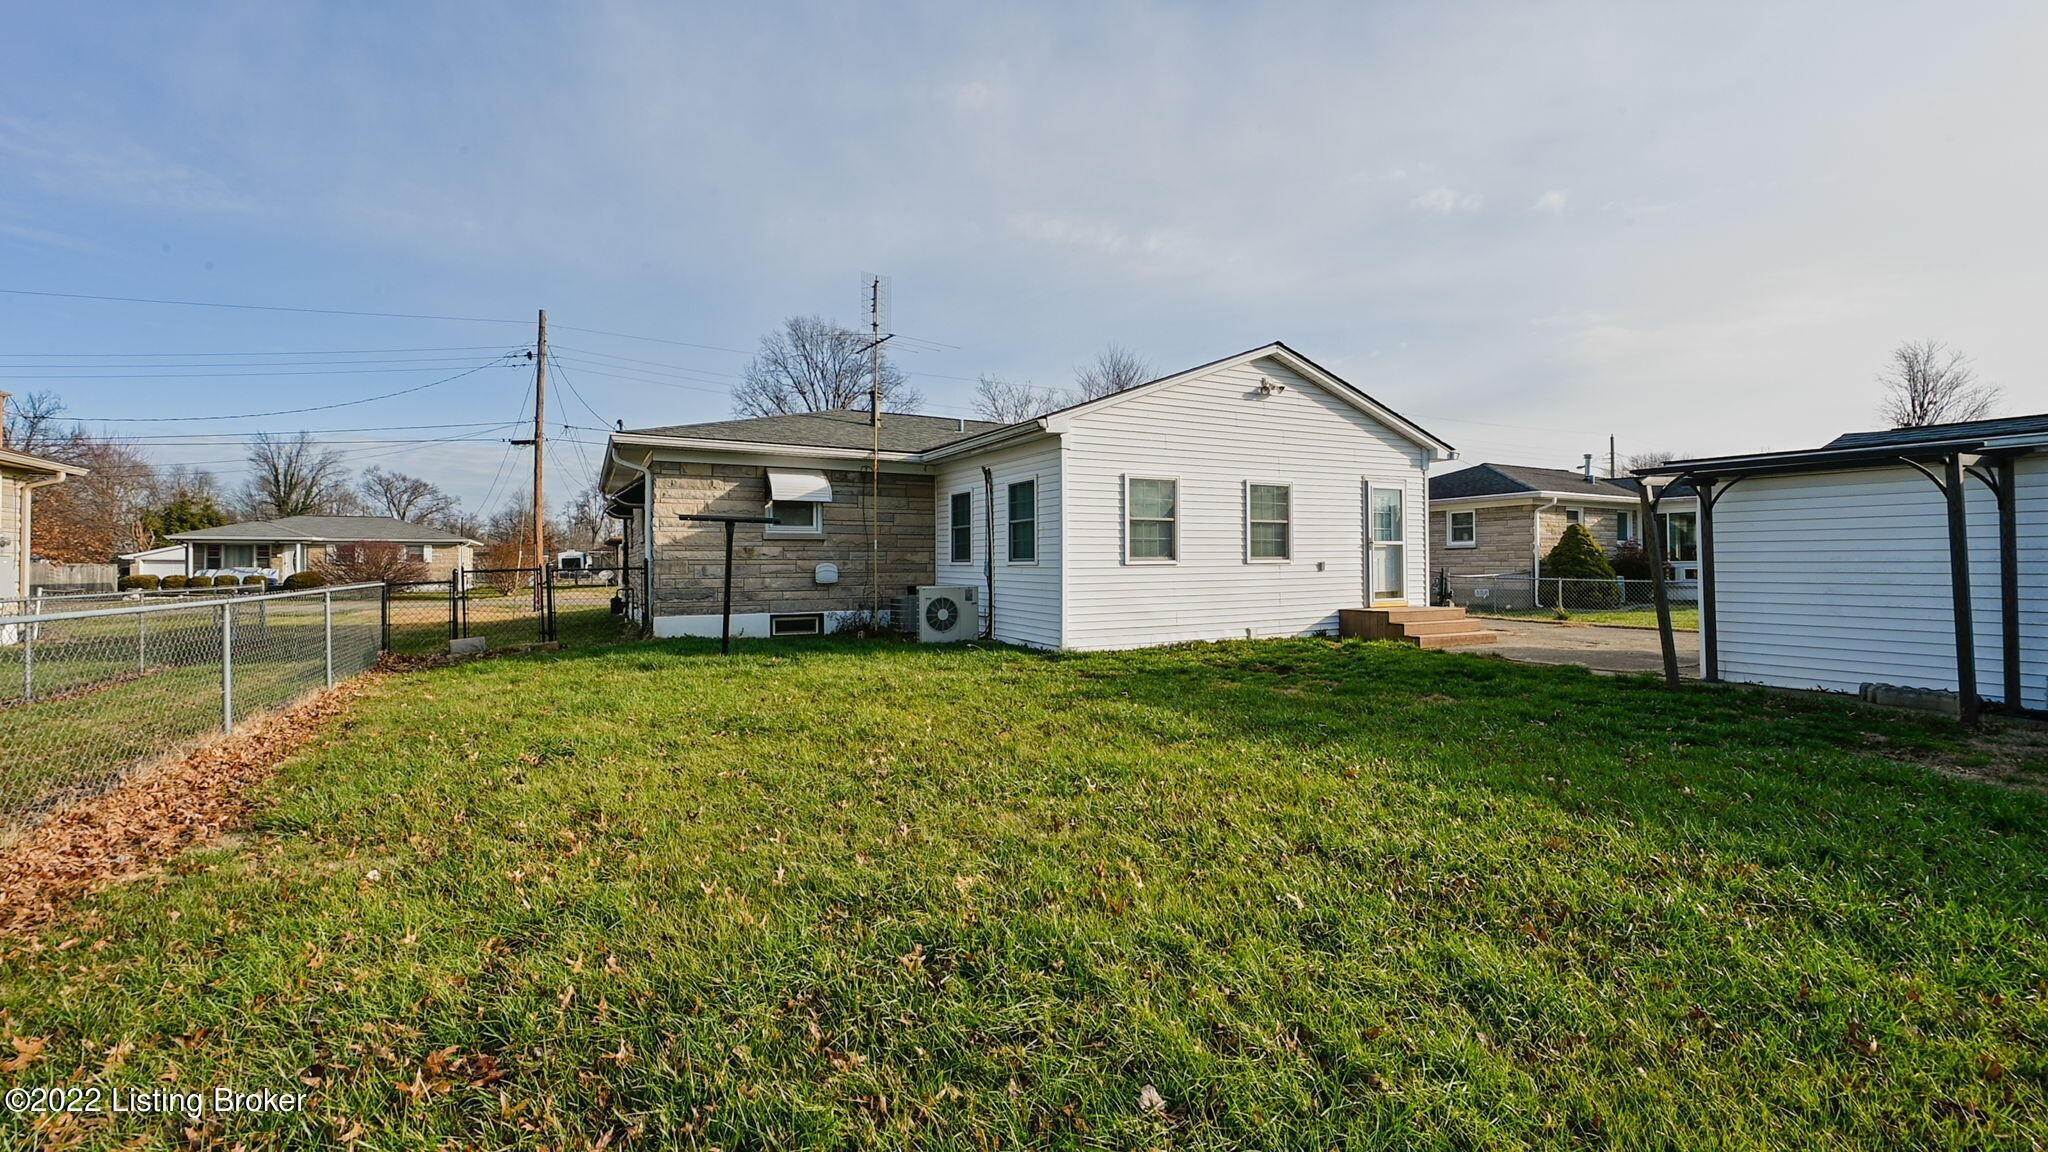 27. Single Family at Louisville, KY 40258